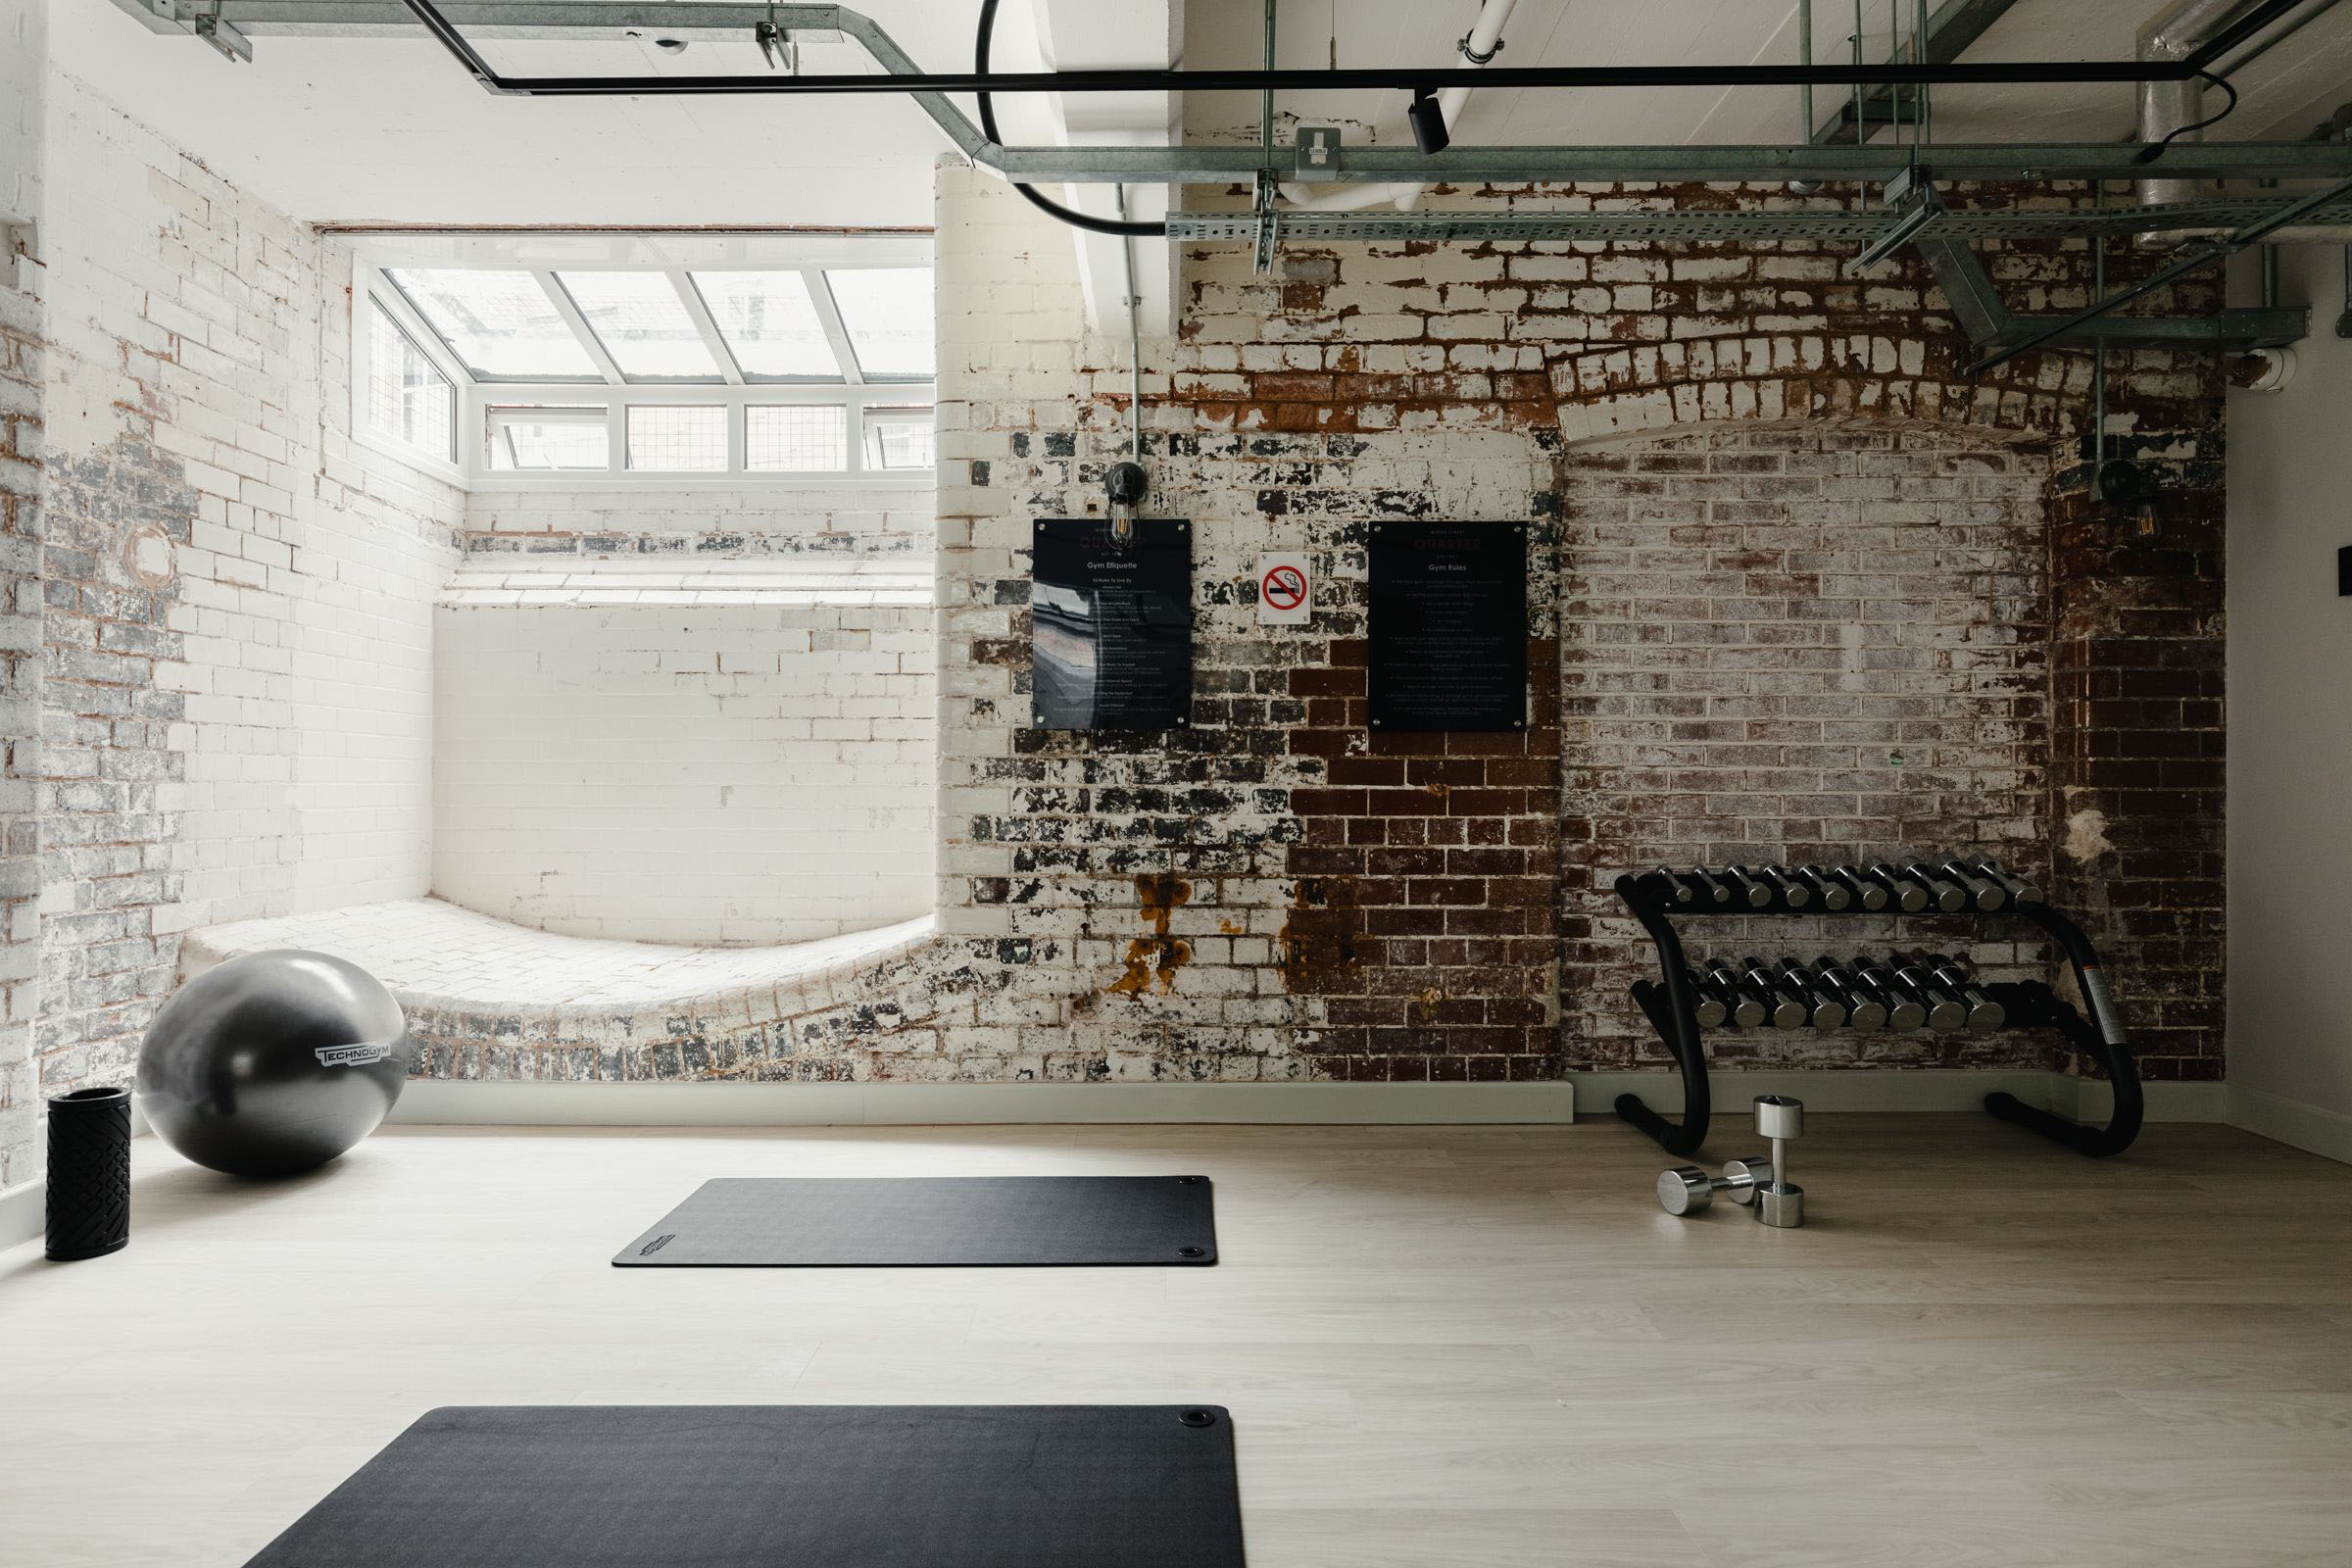 Wellness design trends the experts say are here to stay